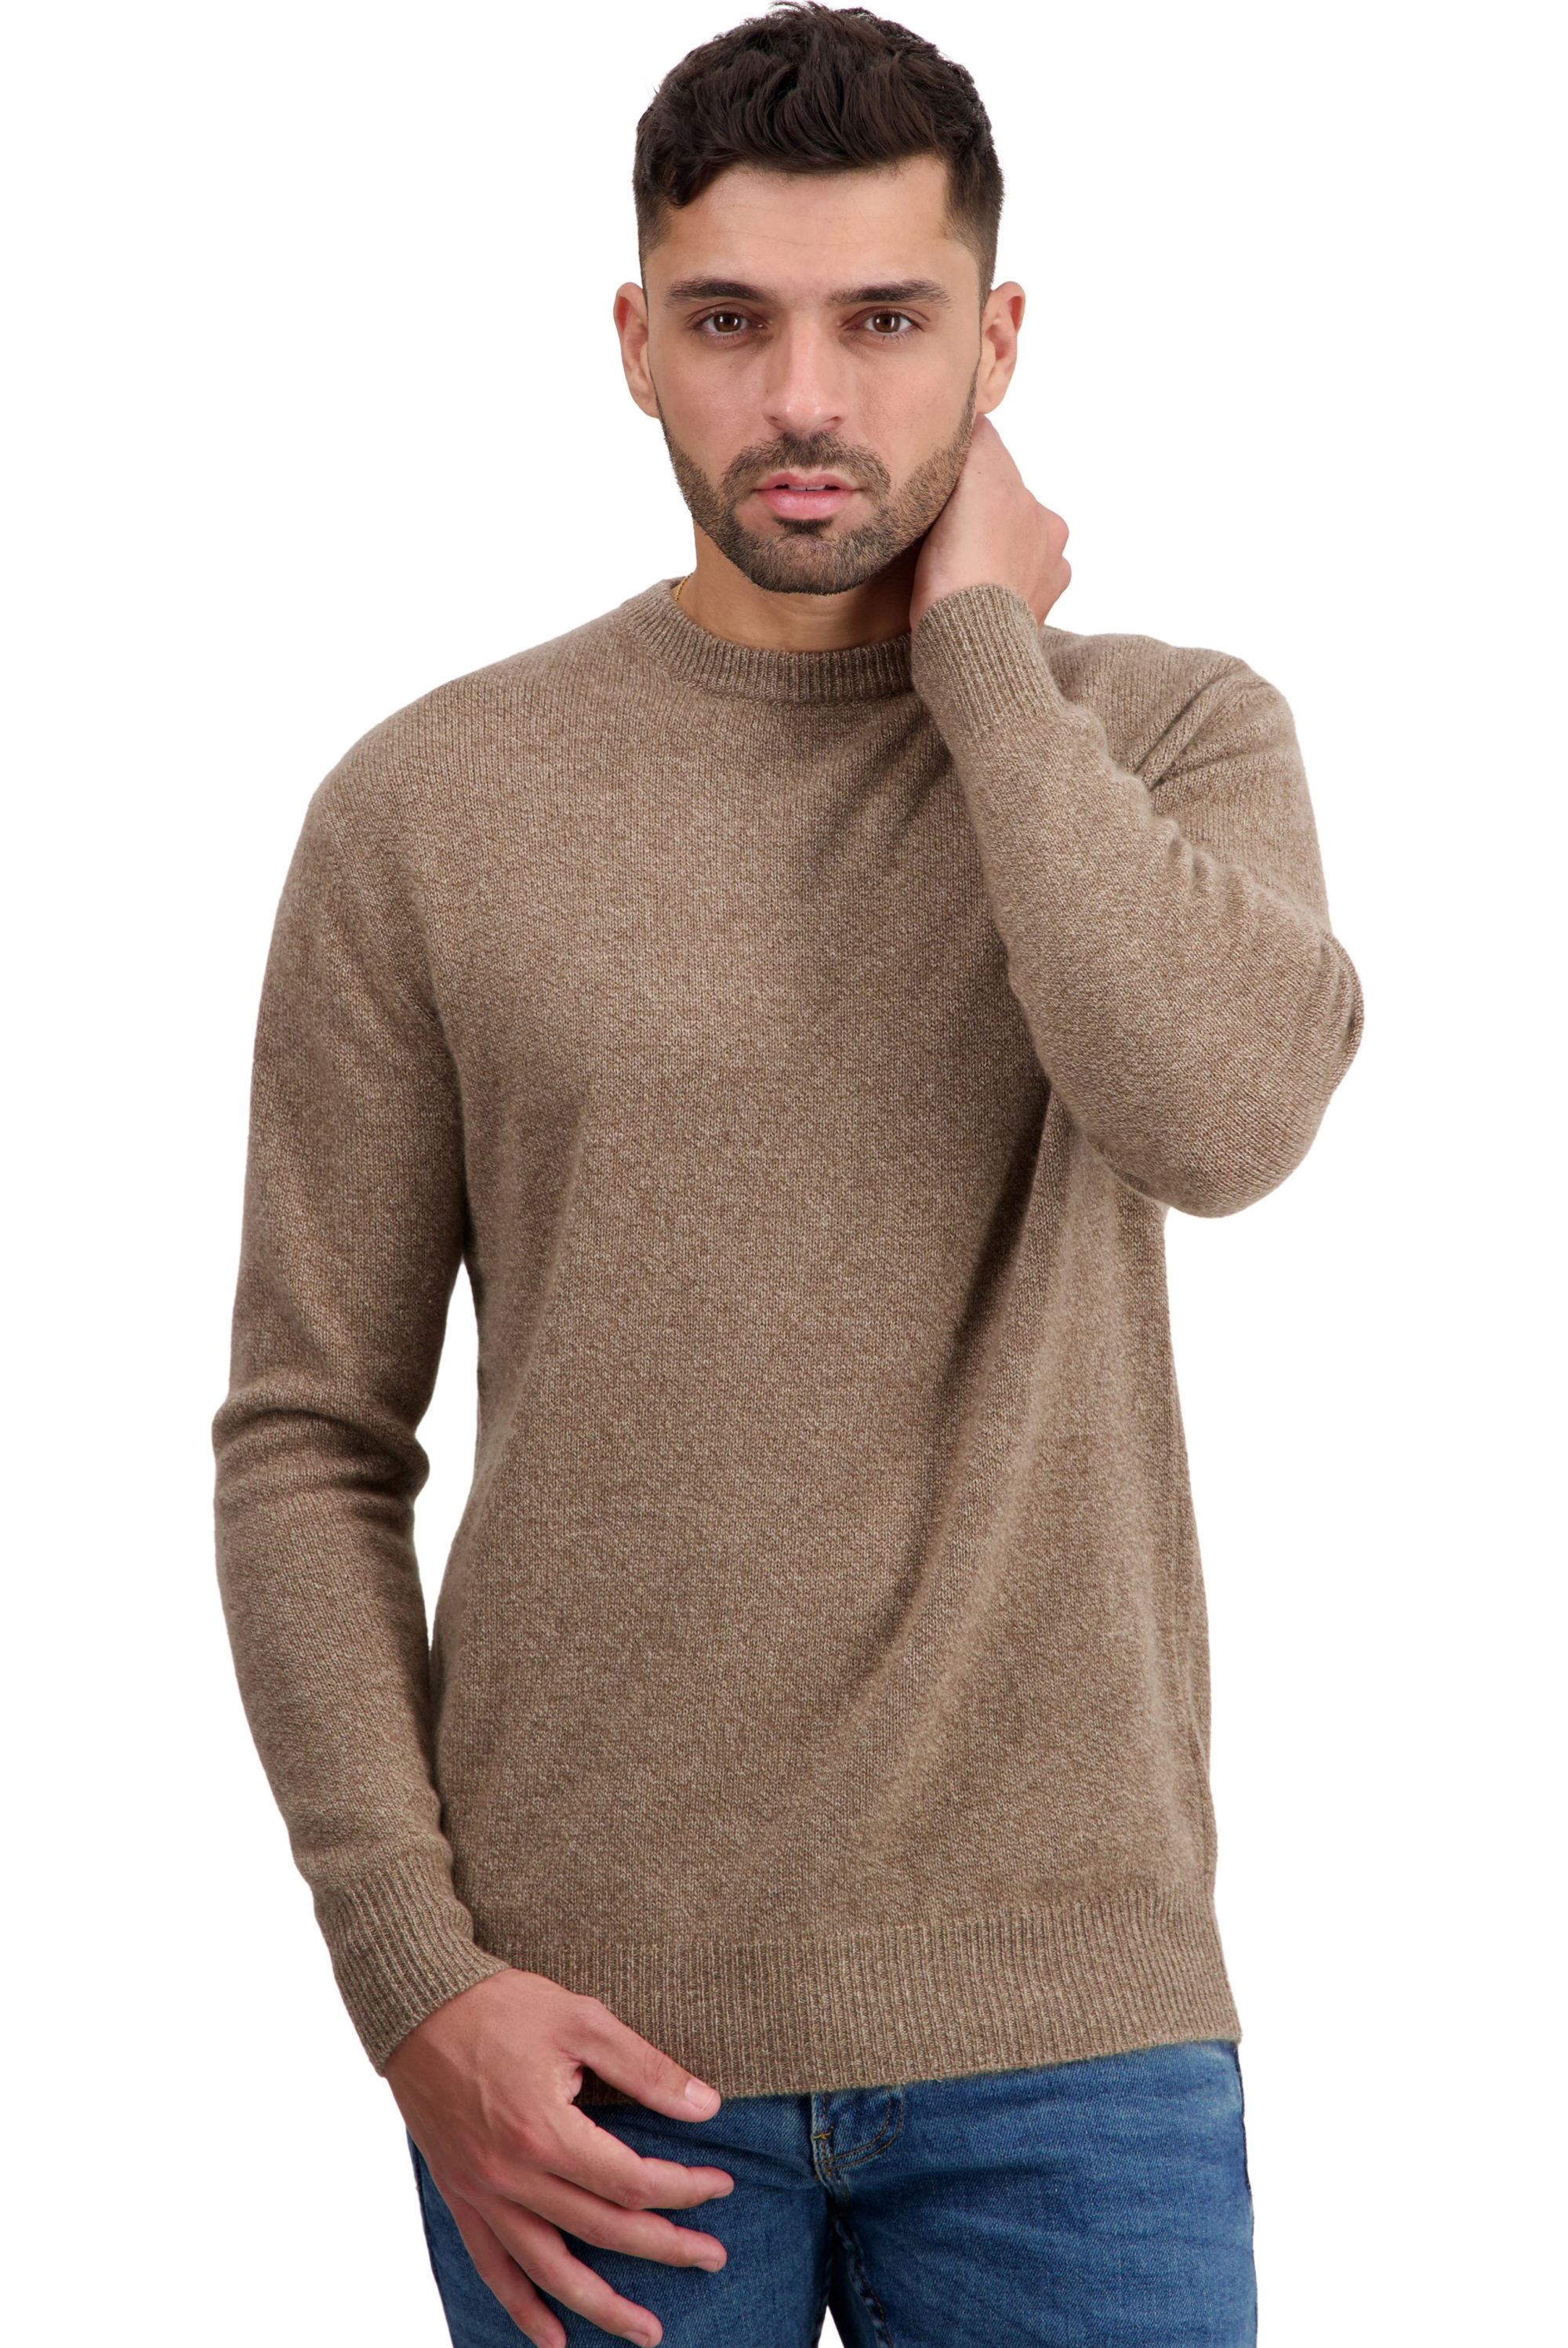 Cachemire pull homme col rond touraine first tan marl l